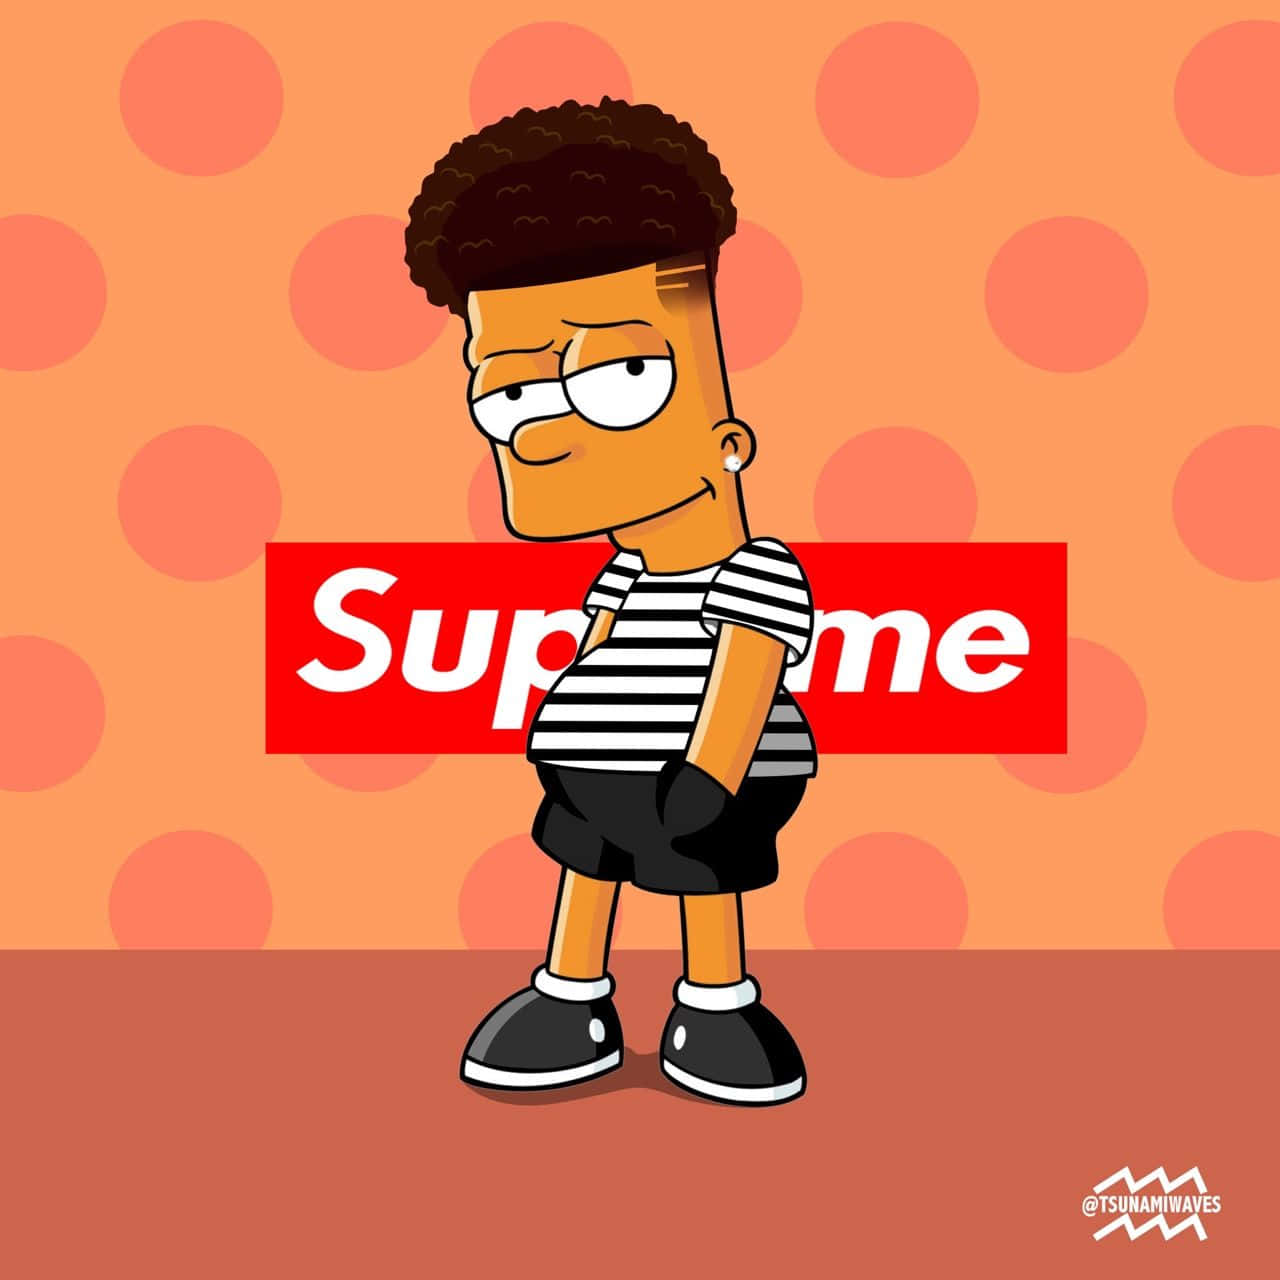 Get Up To No Good In Style With Supreme Bart Simpson